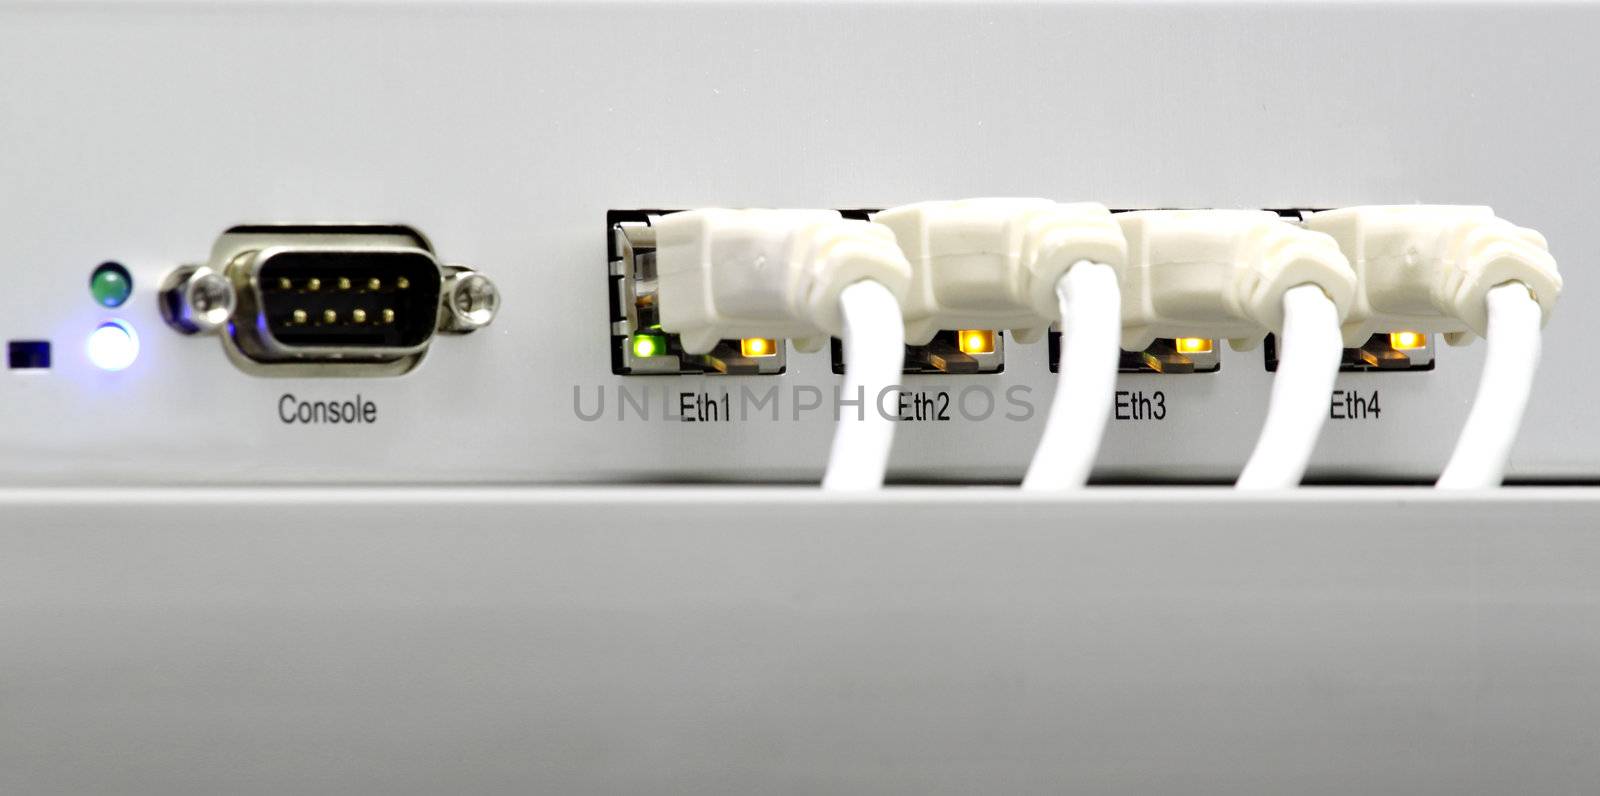 Back side of connected router with connected ethernet ports